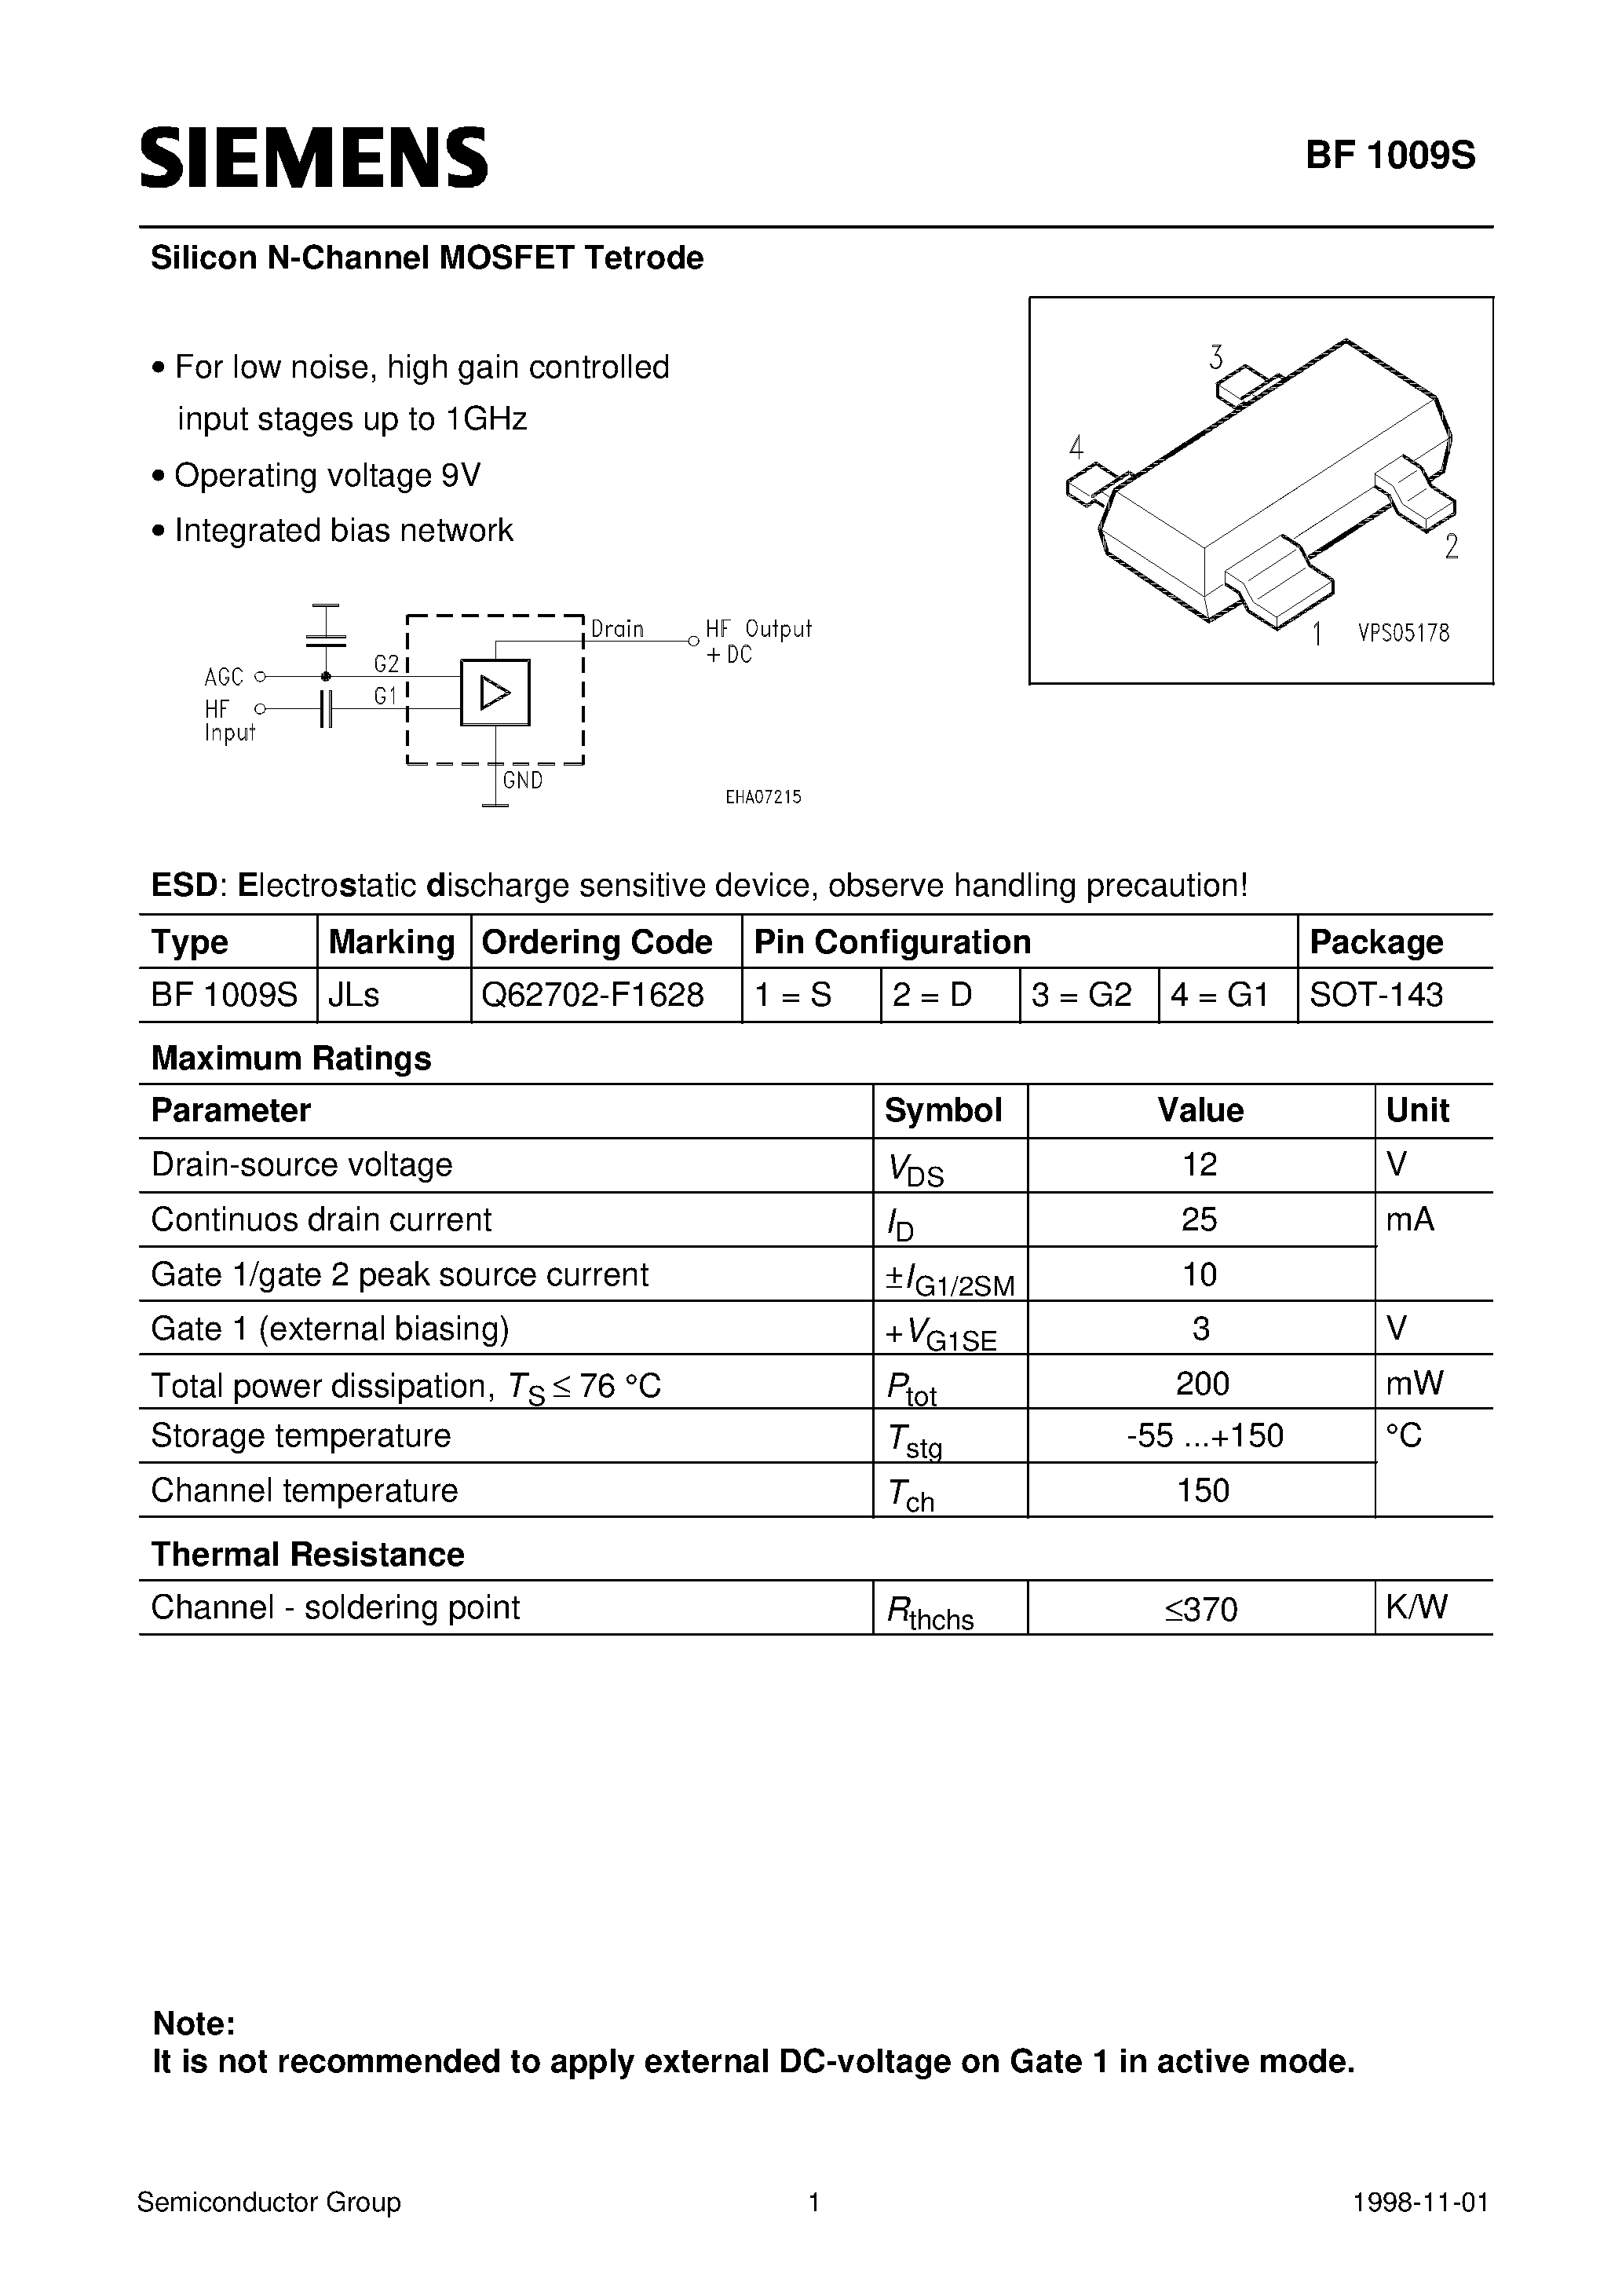 Даташит BF1009S - Silicon N-Channel MOSFET Tetrode (For low noise/ high gain controlled input stages up to 1GHz Operating voltage 9V Integrated bias network) страница 1